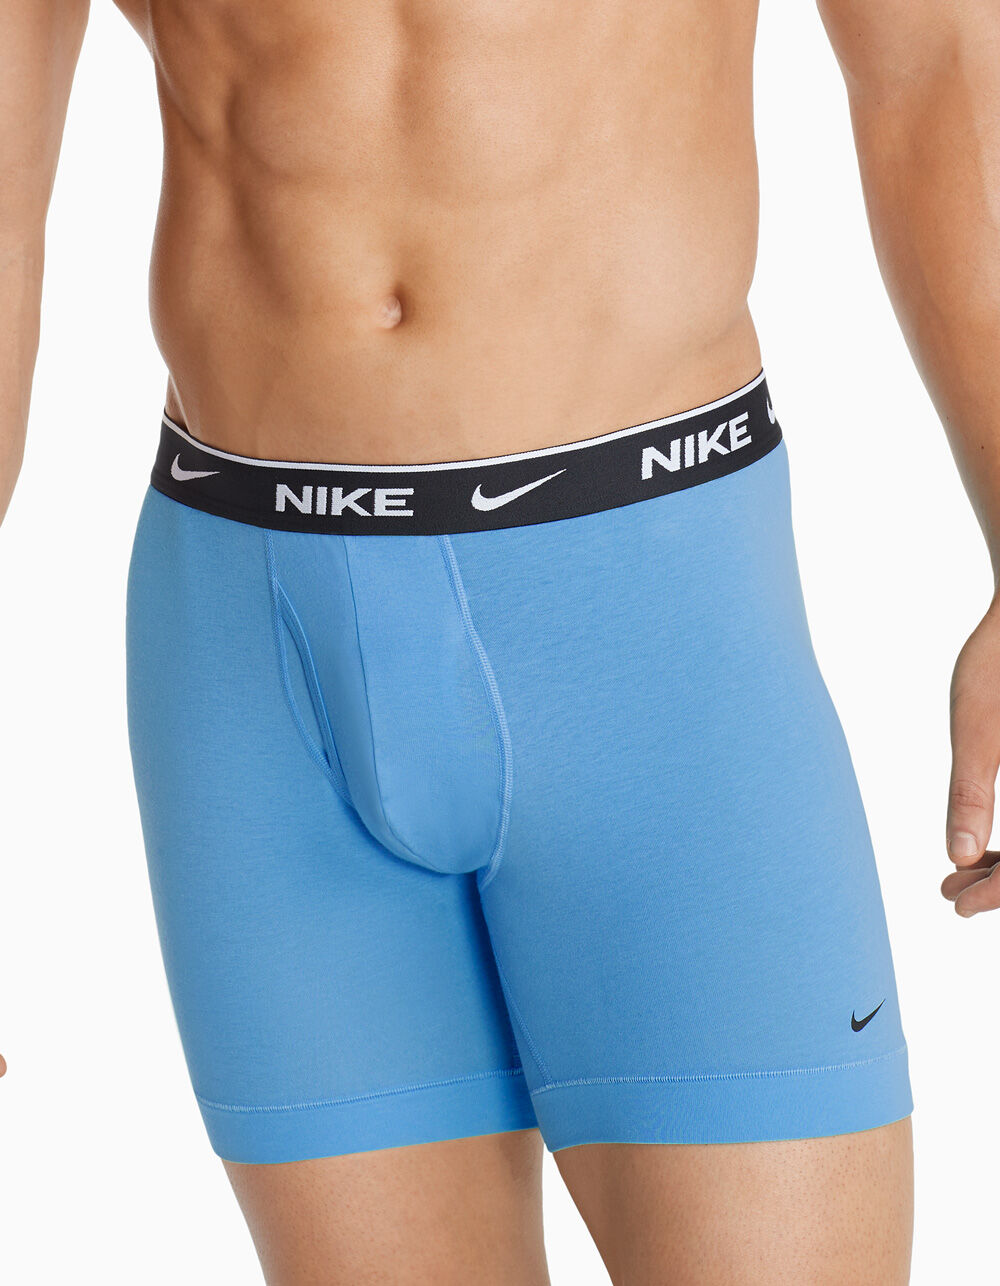 Men's Nike 3-pack Everyday Stretch Boxer Briefs